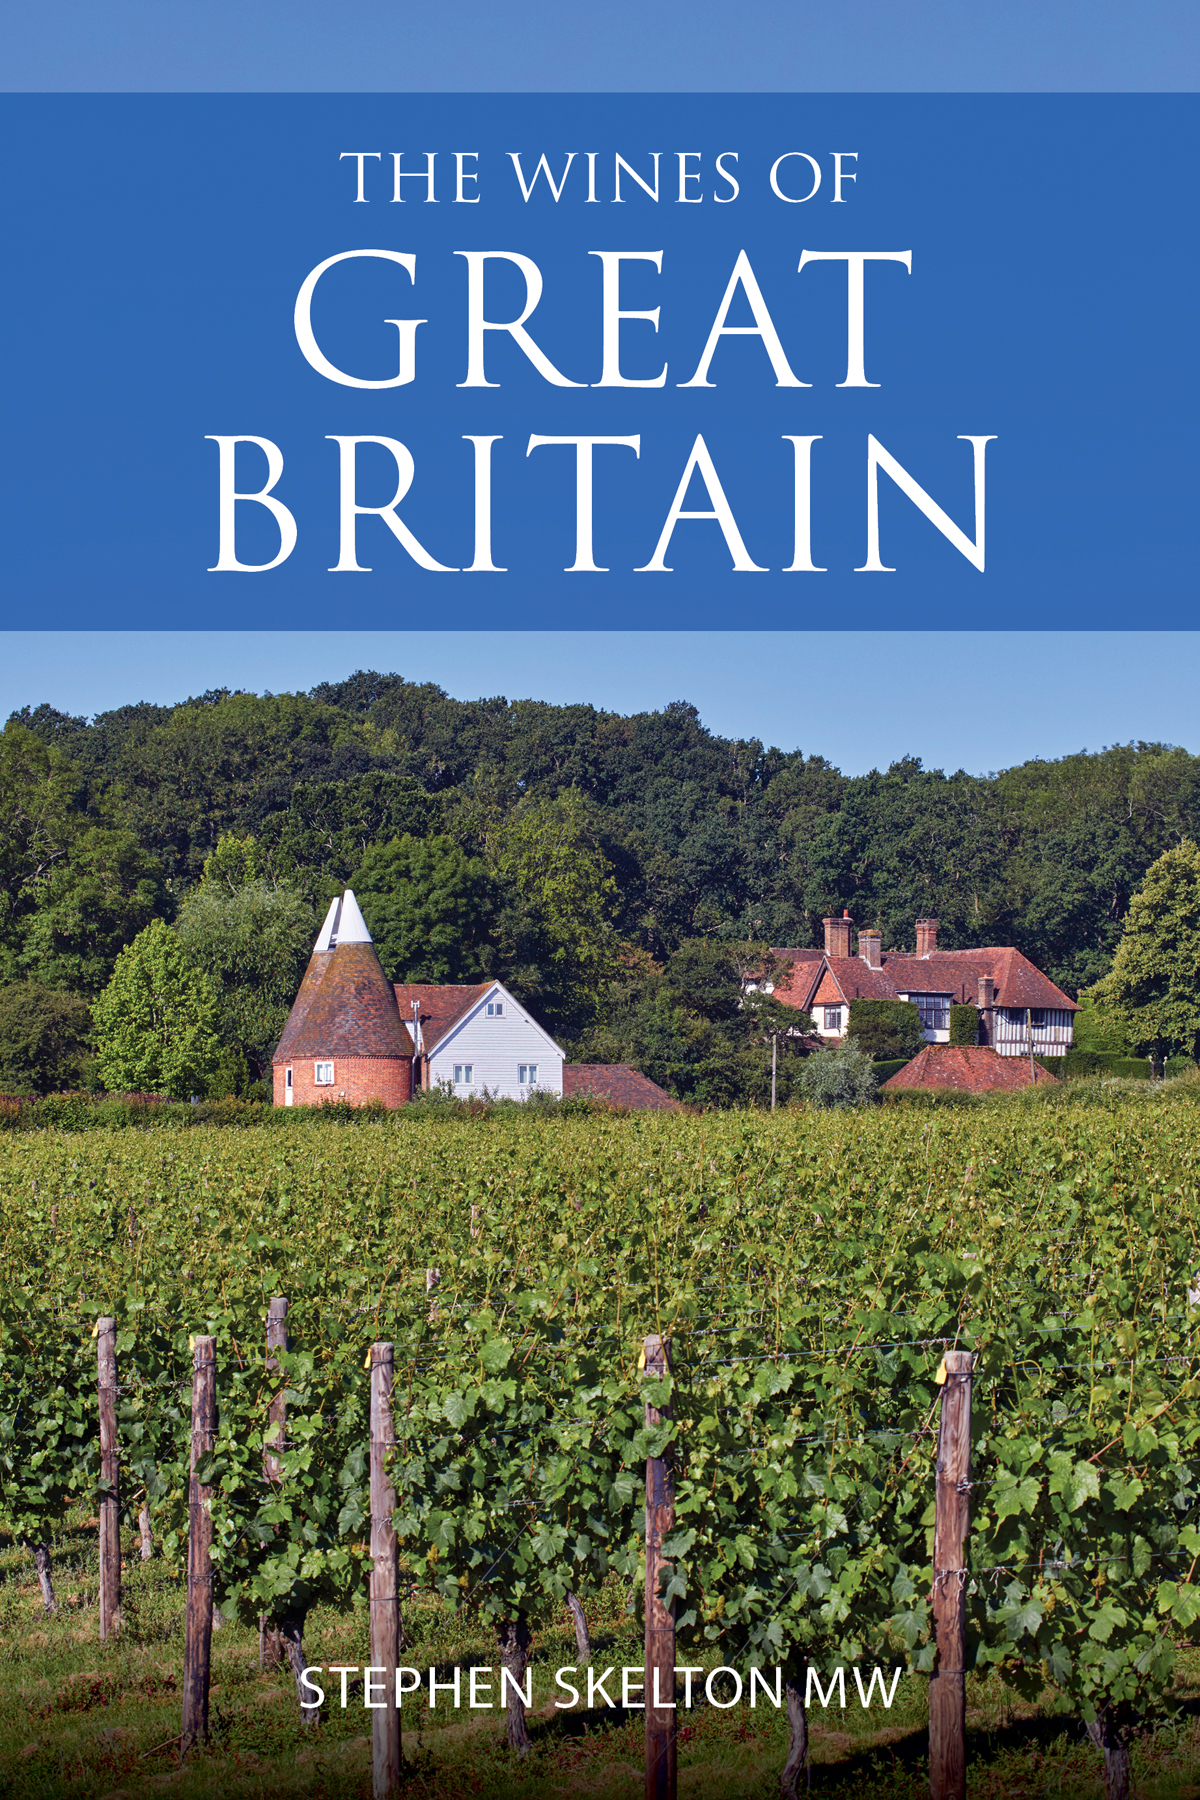 Extract: The wines of Great Britain by Stephen Skelton MW